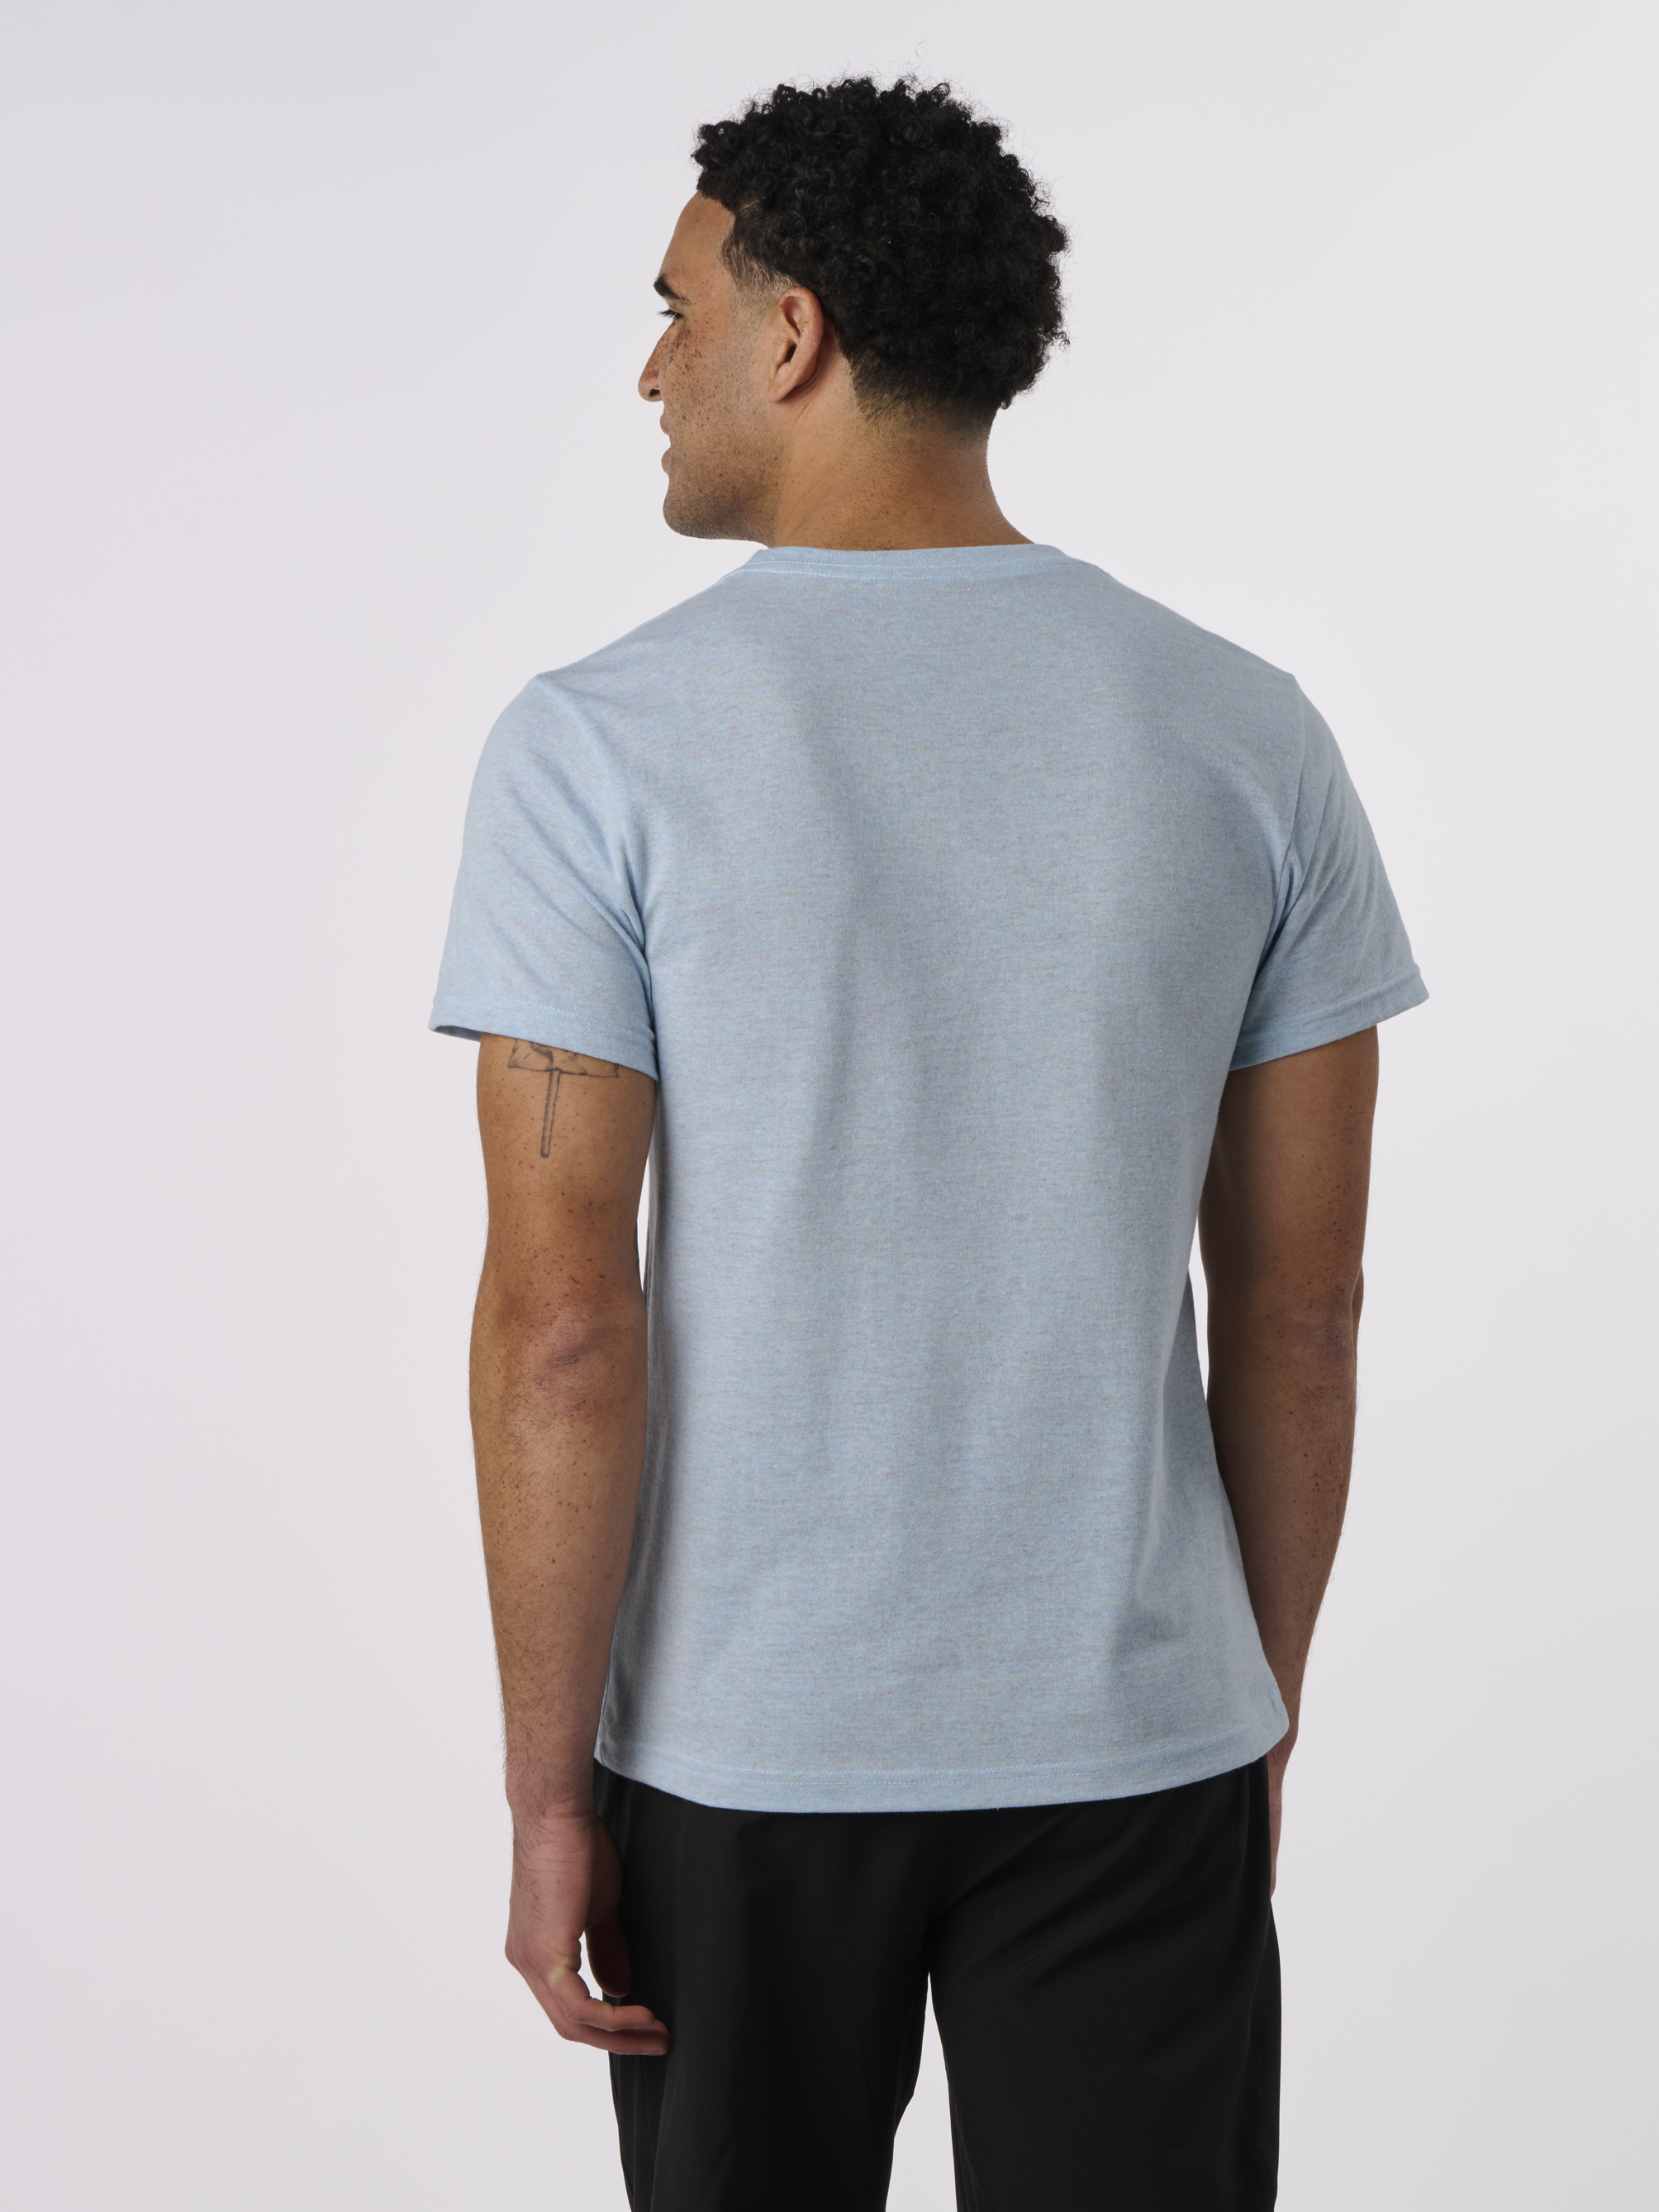 RECOVER_RS100_CLASSICSHORTSLEEVETSHIRT_COOLERBLUE_BACK.png